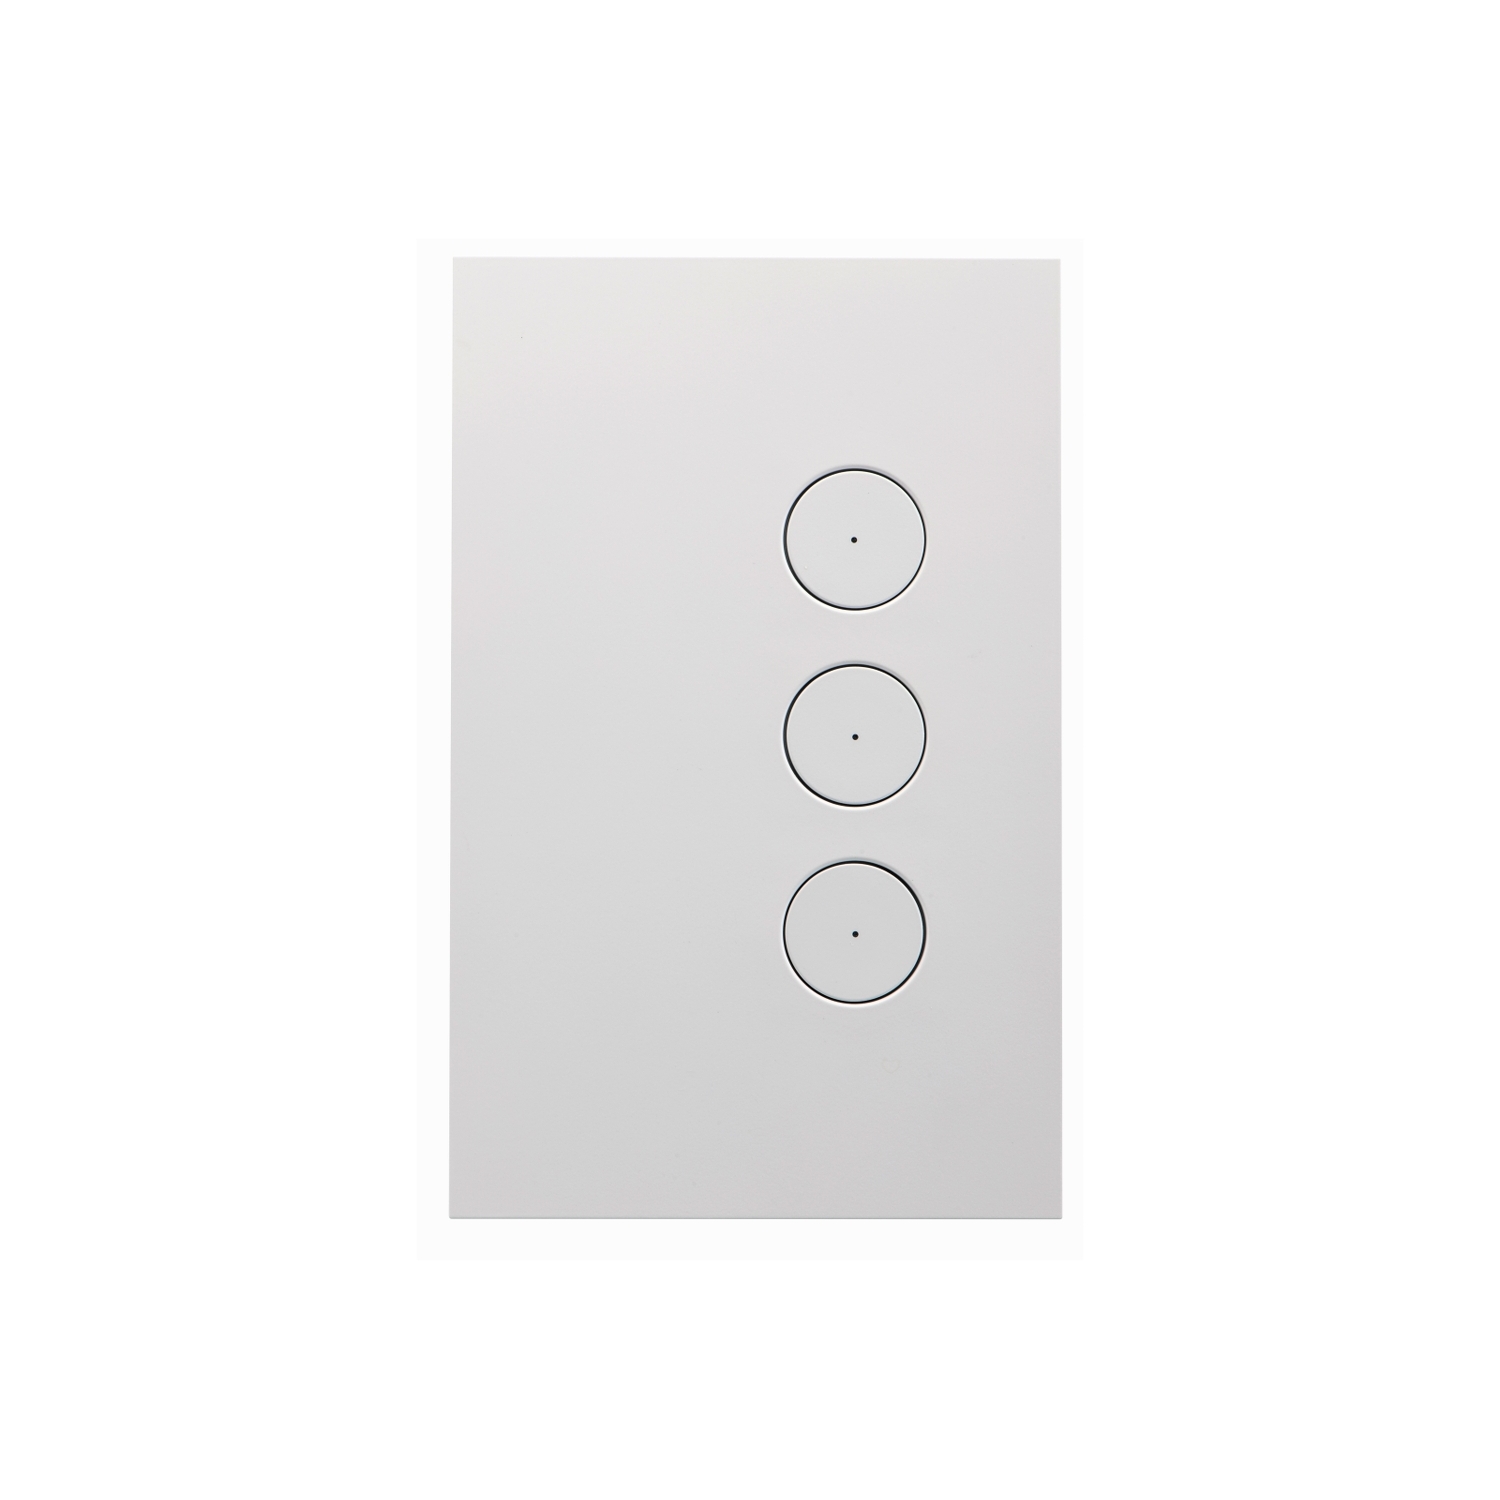 Clipsal Grid Plate and Cover Switch Saturn Zen - Less mechanism - 3-gang - Choose Colour